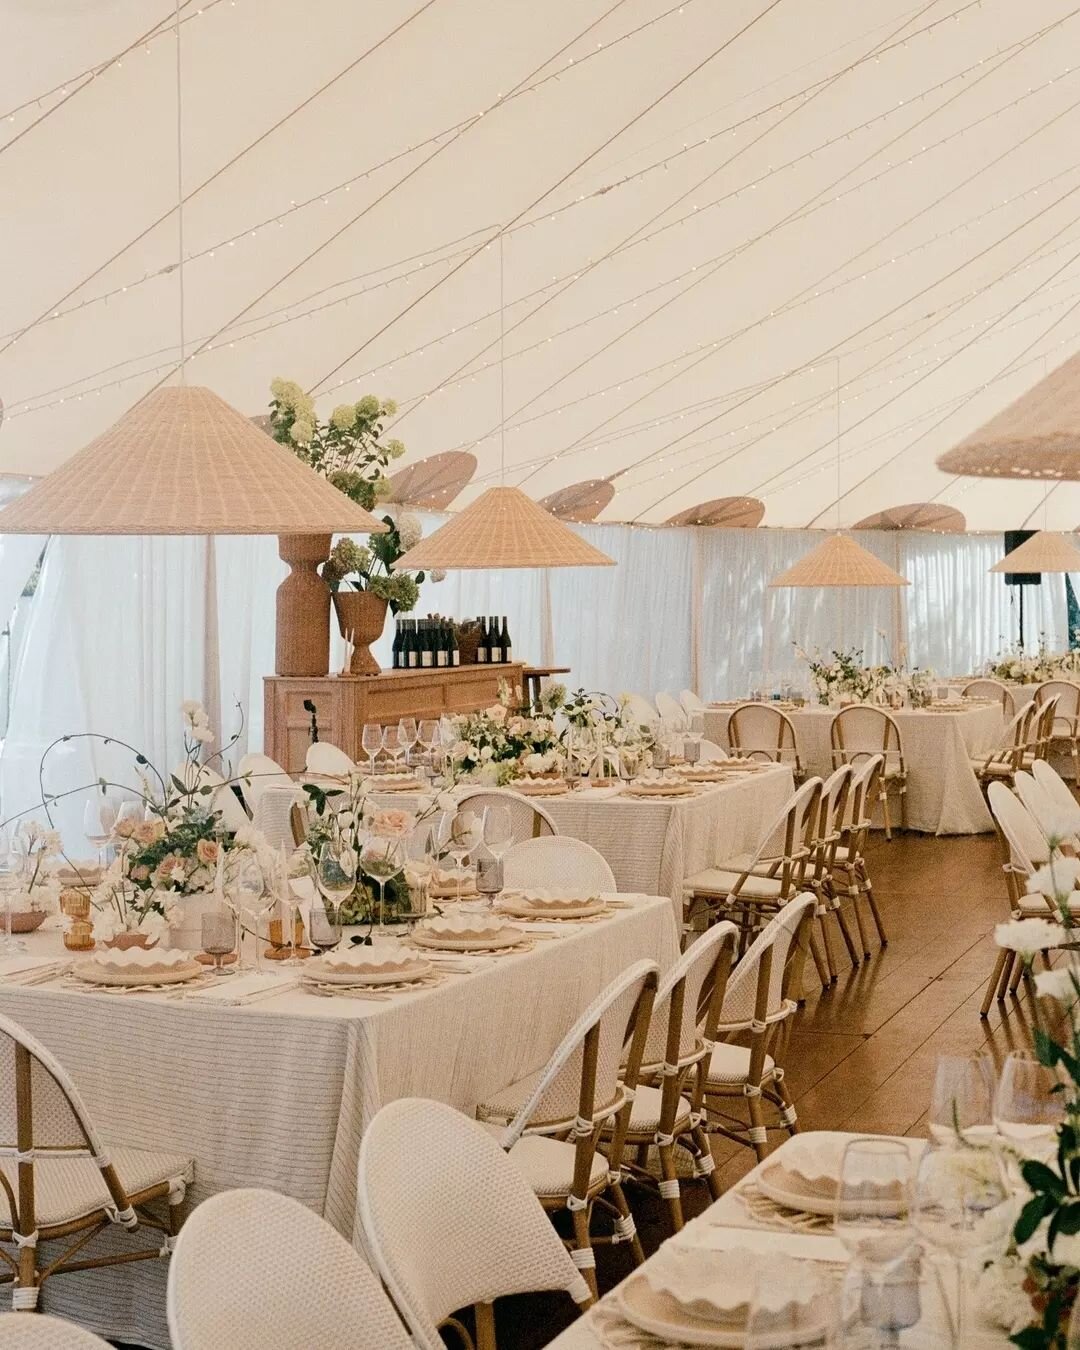 Insanely beautiful for Fliss &amp; Ben @onelovelydaystyling&nbsp;✨
Captured perfectly by @sapphirestudios___

Cape Cod Sperry Tent and Hardwood flooring by us.

Fab team &nbsp;
@lalumiere_nz
@michelecoomeyfloral
@royallaboratorie
@flockevents
@greatc